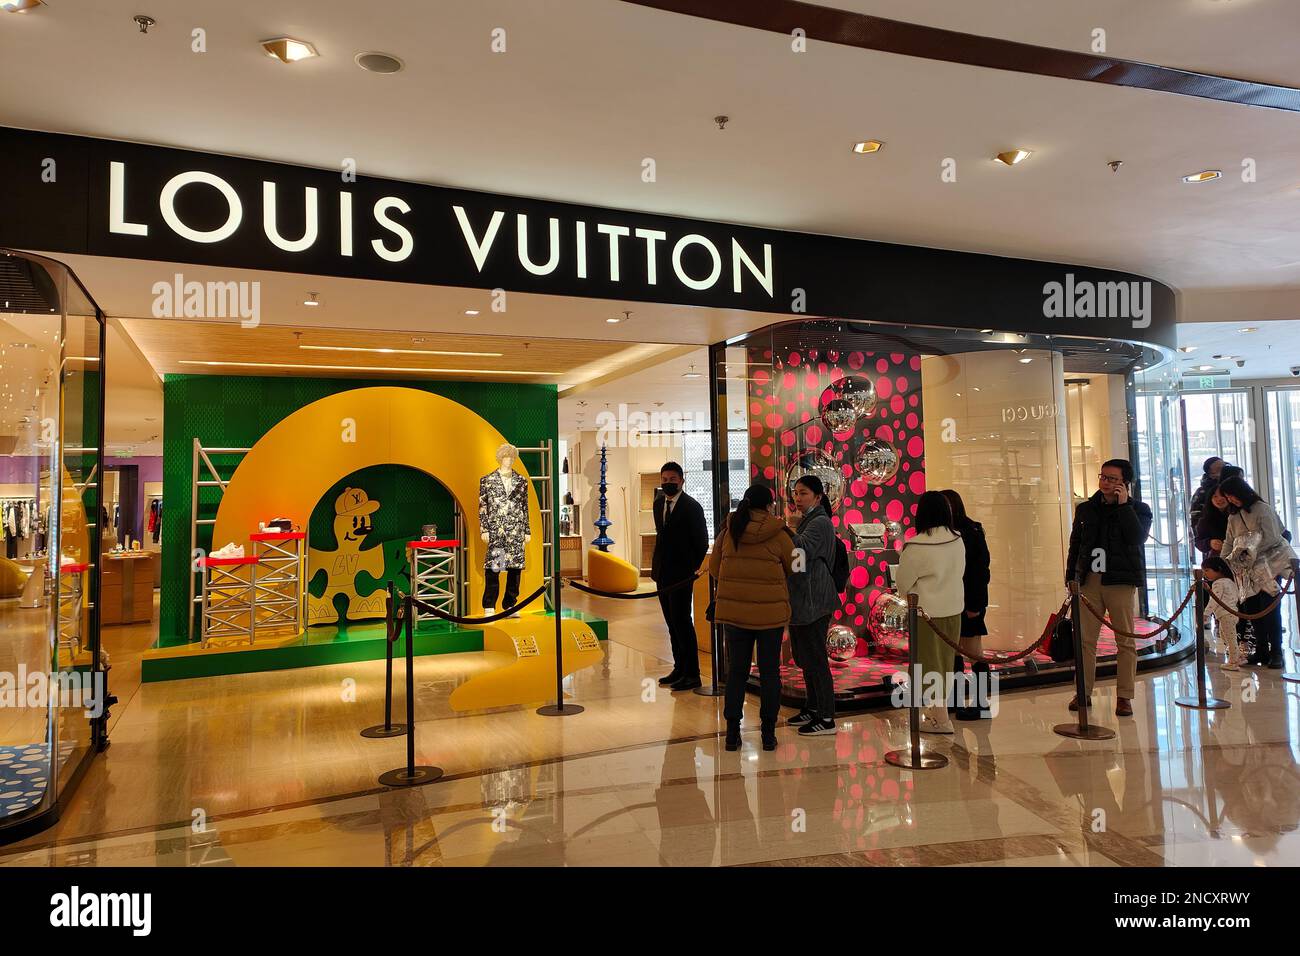 SHANGHAI, CHINA - FEBRUARY 15, 2023 - Customers line up in front of the Louis  Vuitton store at Huihenglong Plaza in Shanghai, China, on Feb 15, 2023.  Sources say Louis Vuitton may